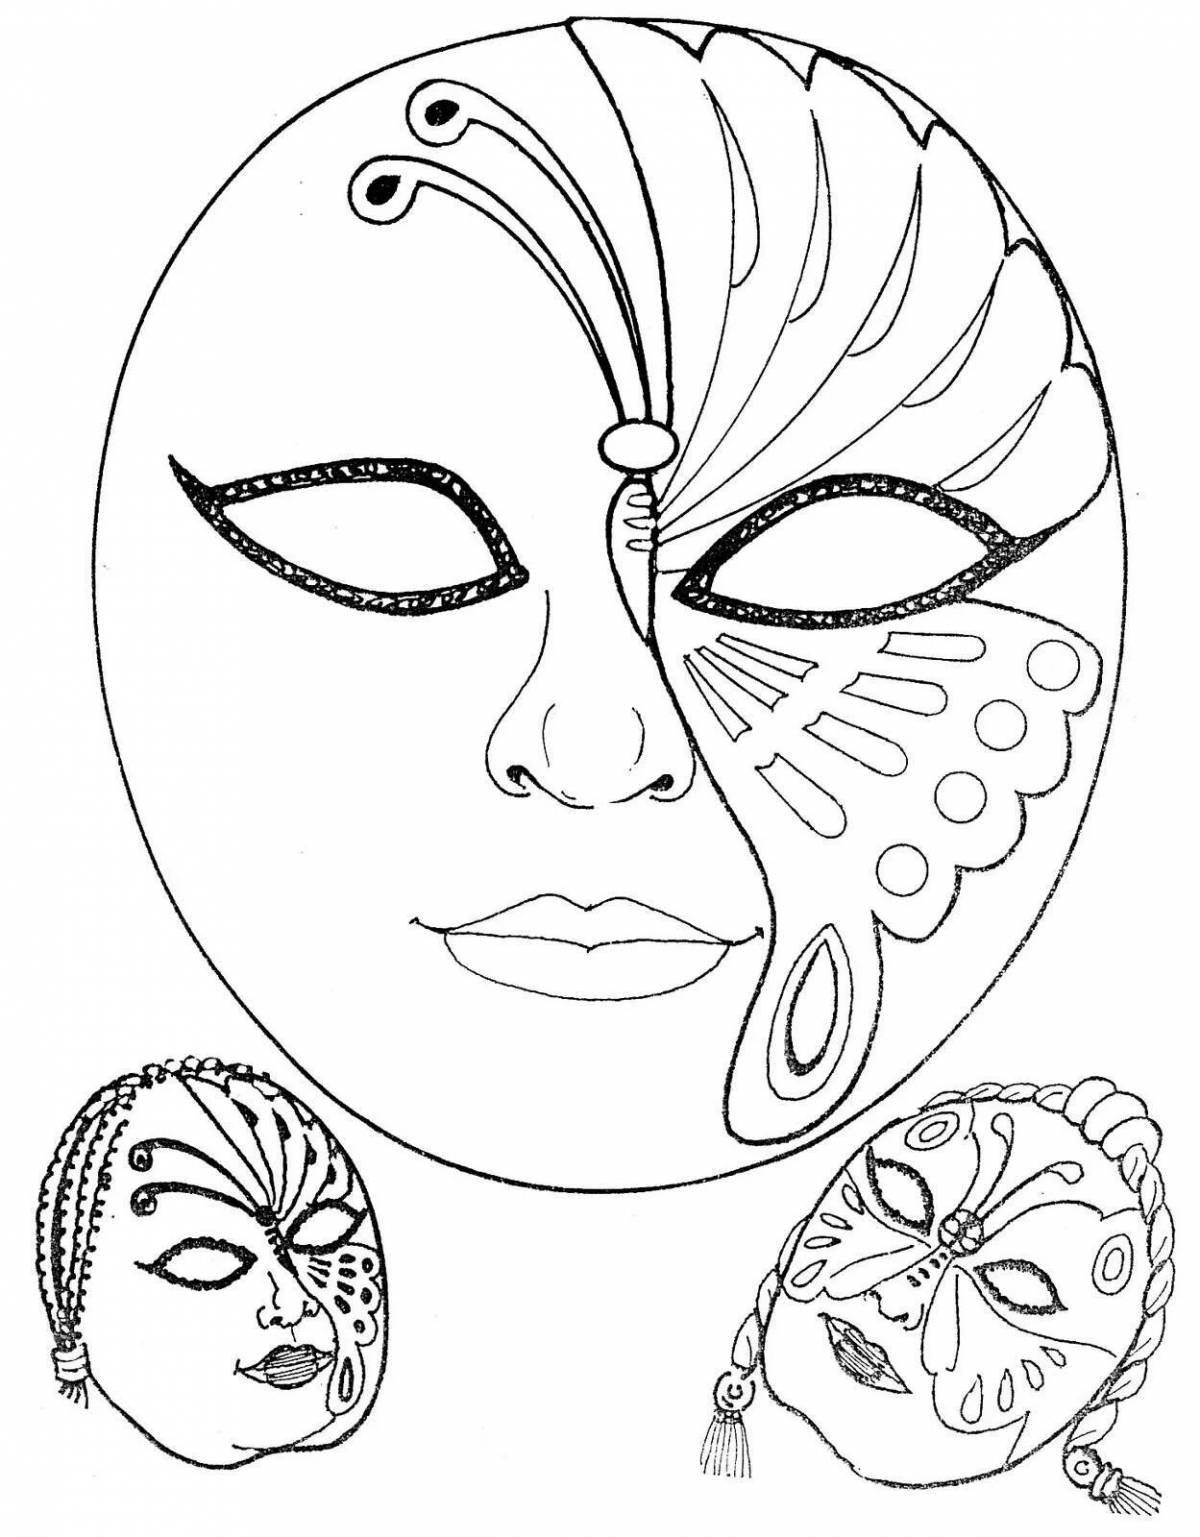 Spirit fabric face mask coloring page